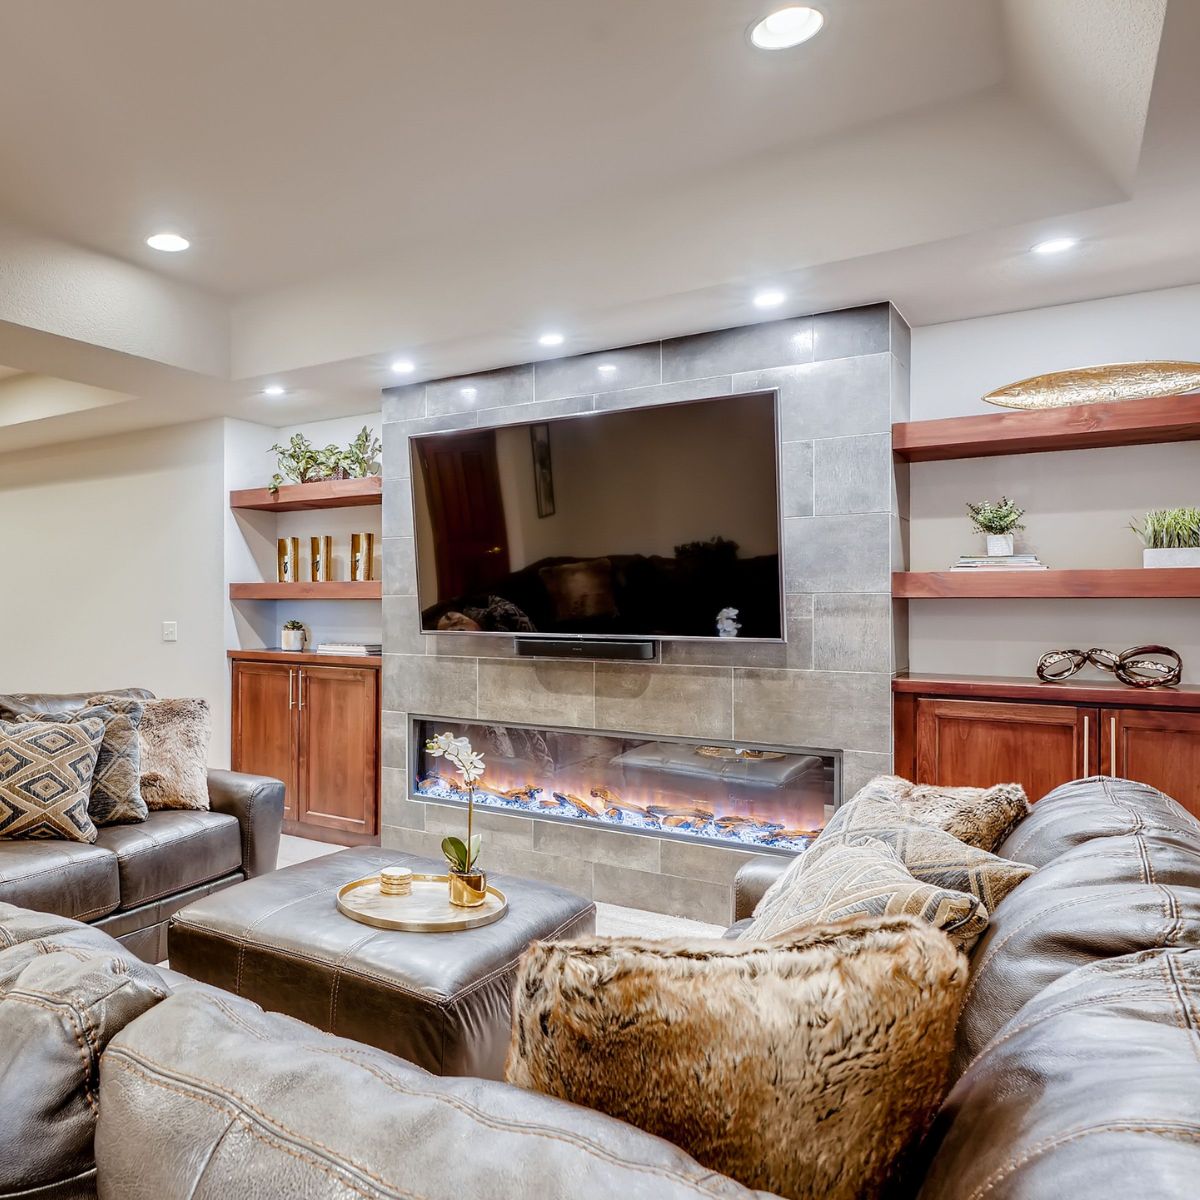 A Guide to Lighting Design for Your Basement